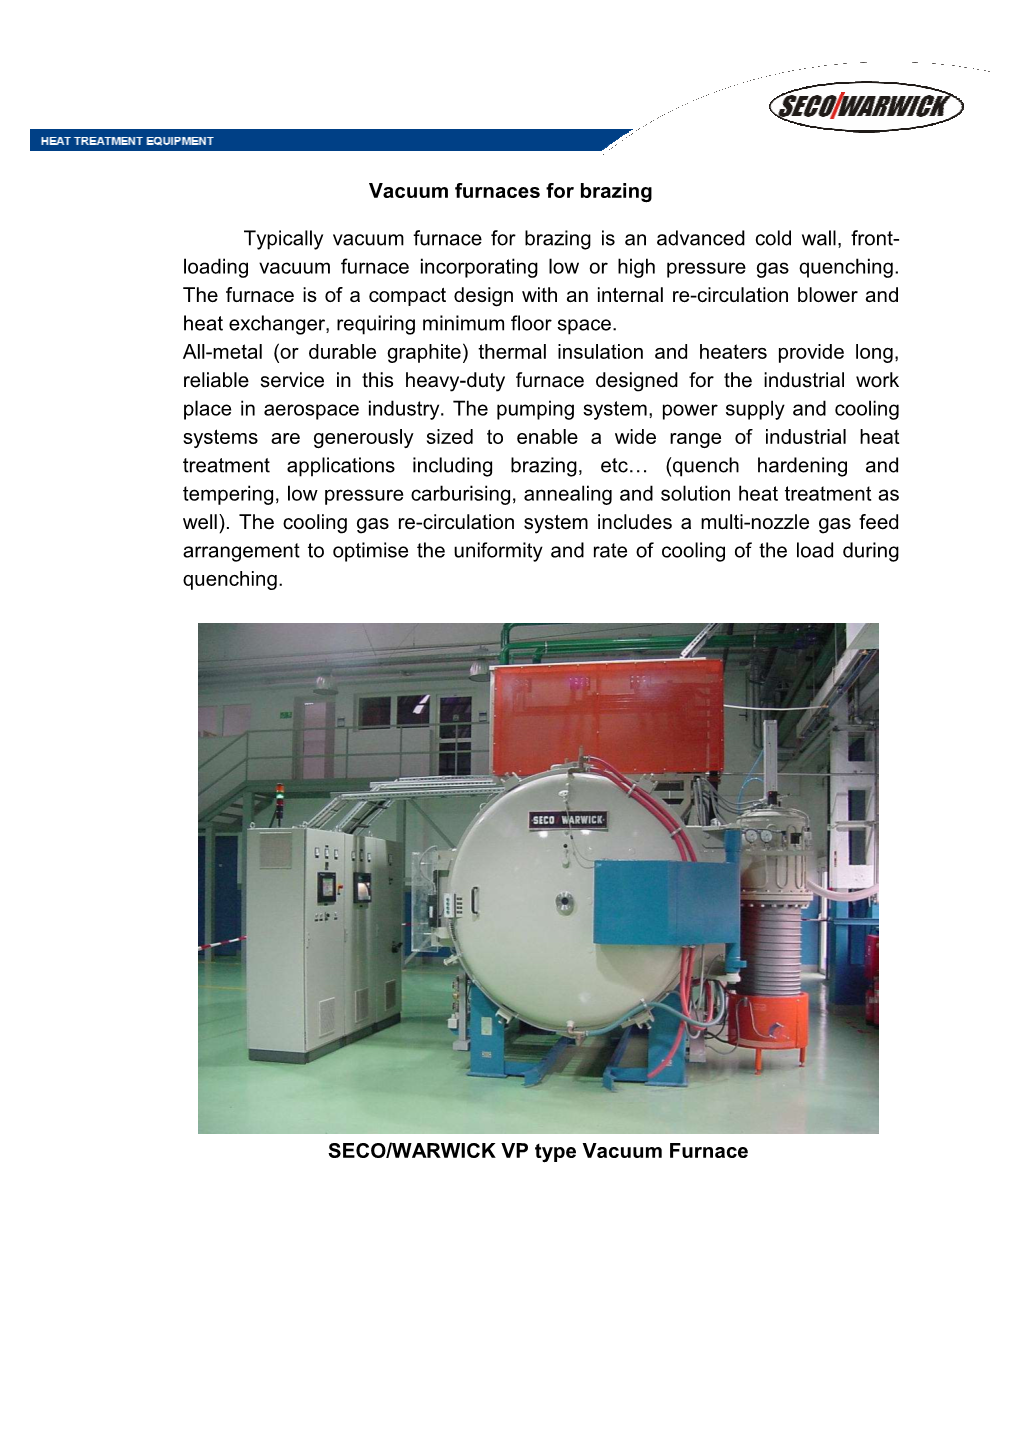 Vacuum Furnaces for Brazing Typically Vacuum Furnace For